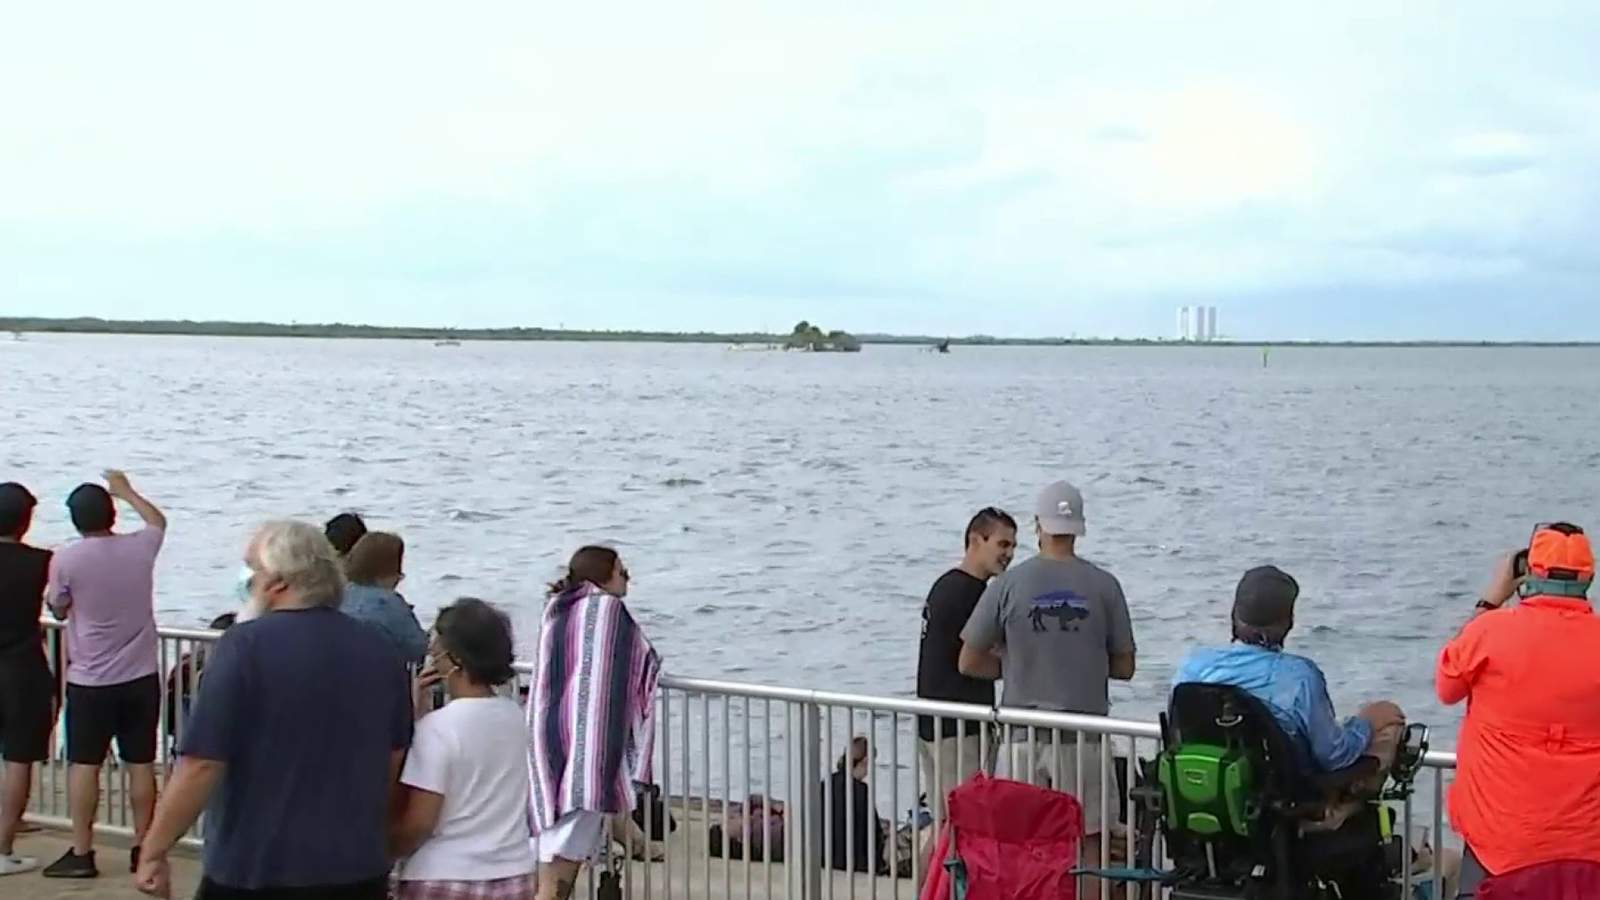 Launch watchers return for 2nd try with patience, umbrellas